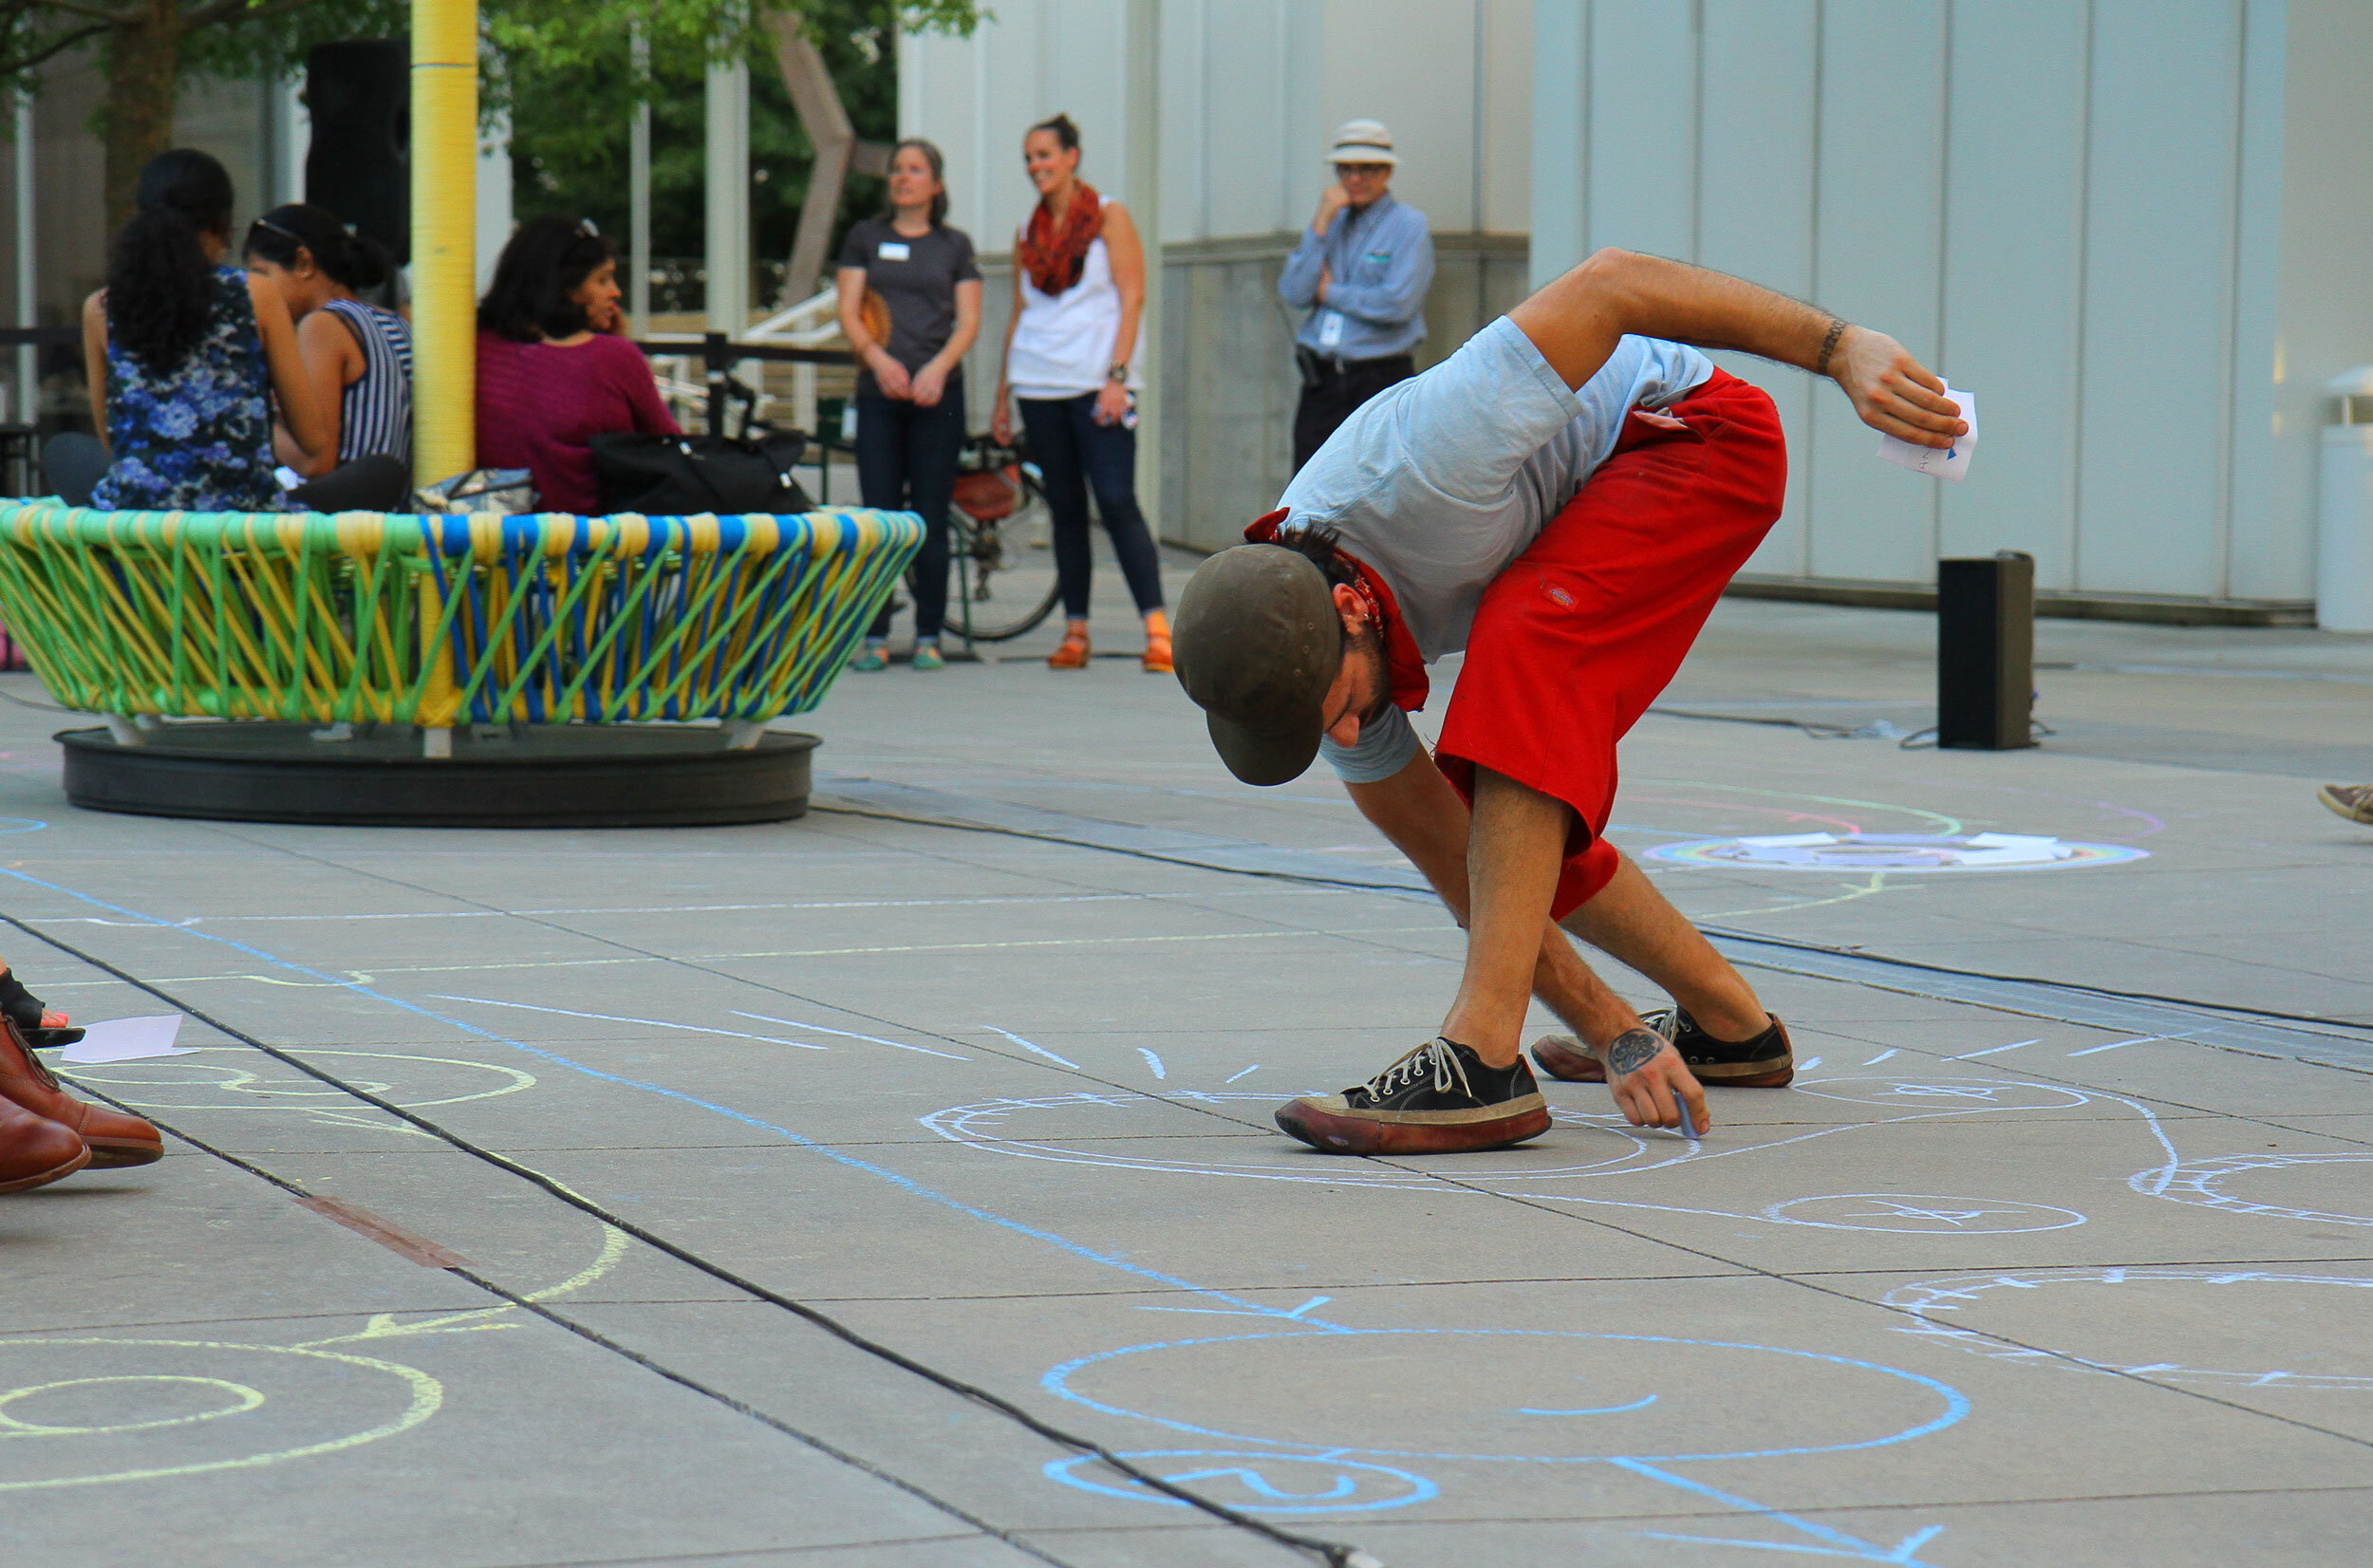 A performer bends over to draw with chalk on the concrete.